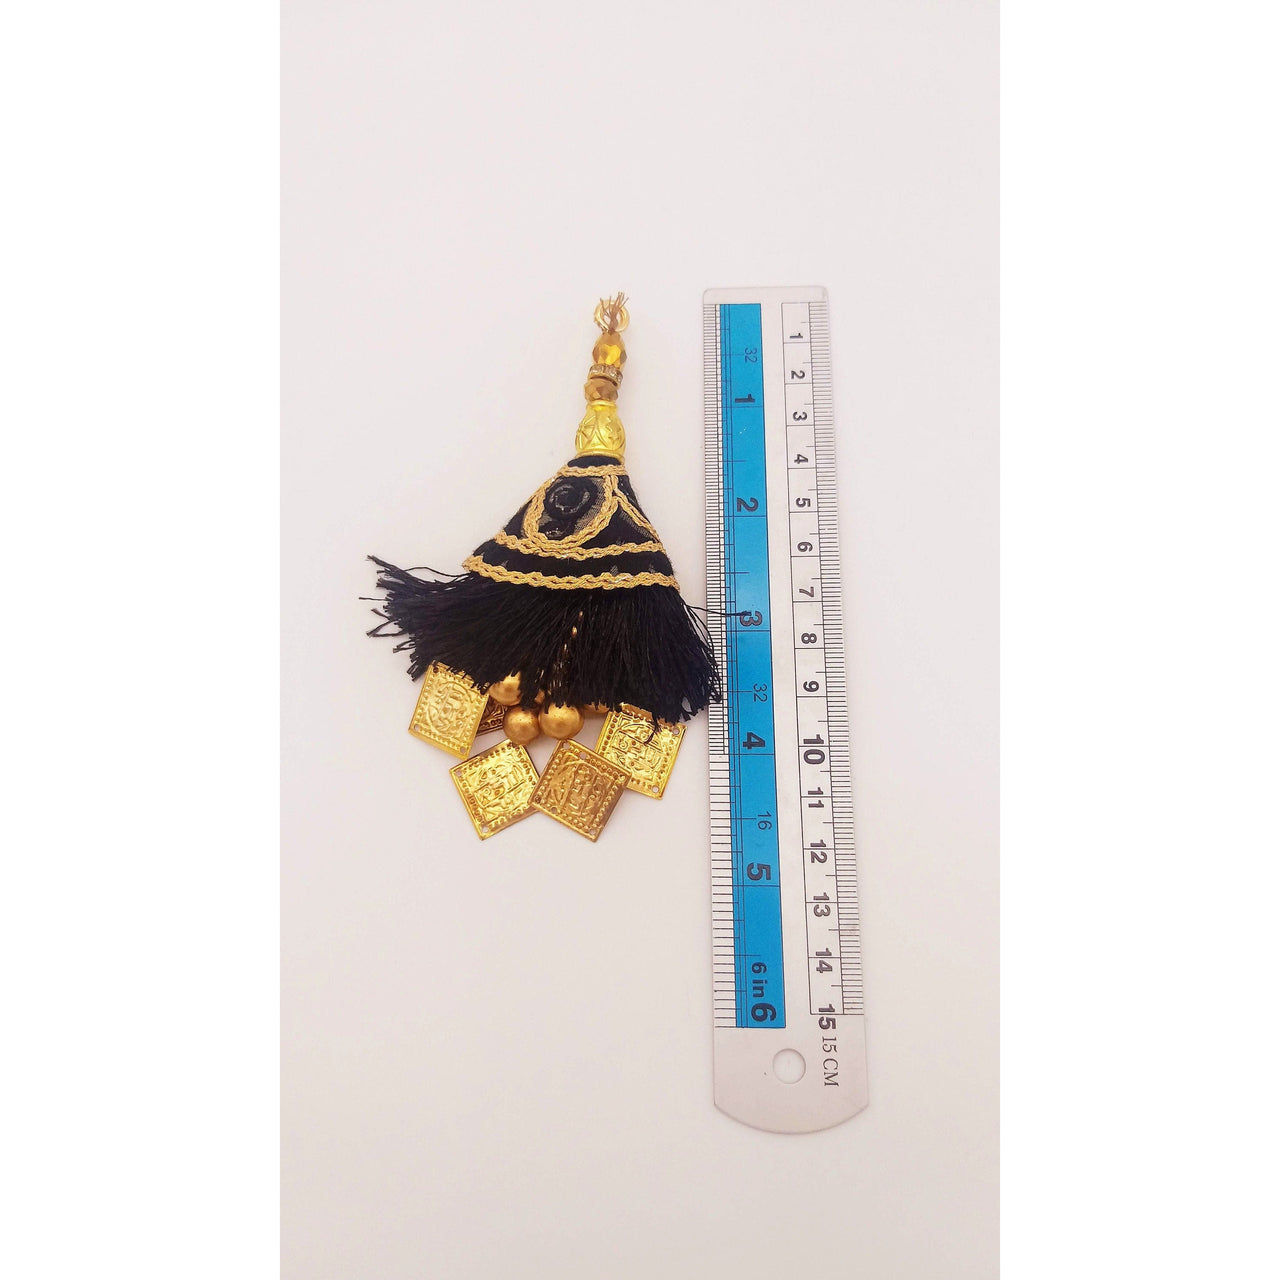 Black Tassels With Gold Beads, Beaded Tassels With Black and Gold Embroidery, Traditional Indian Latkan